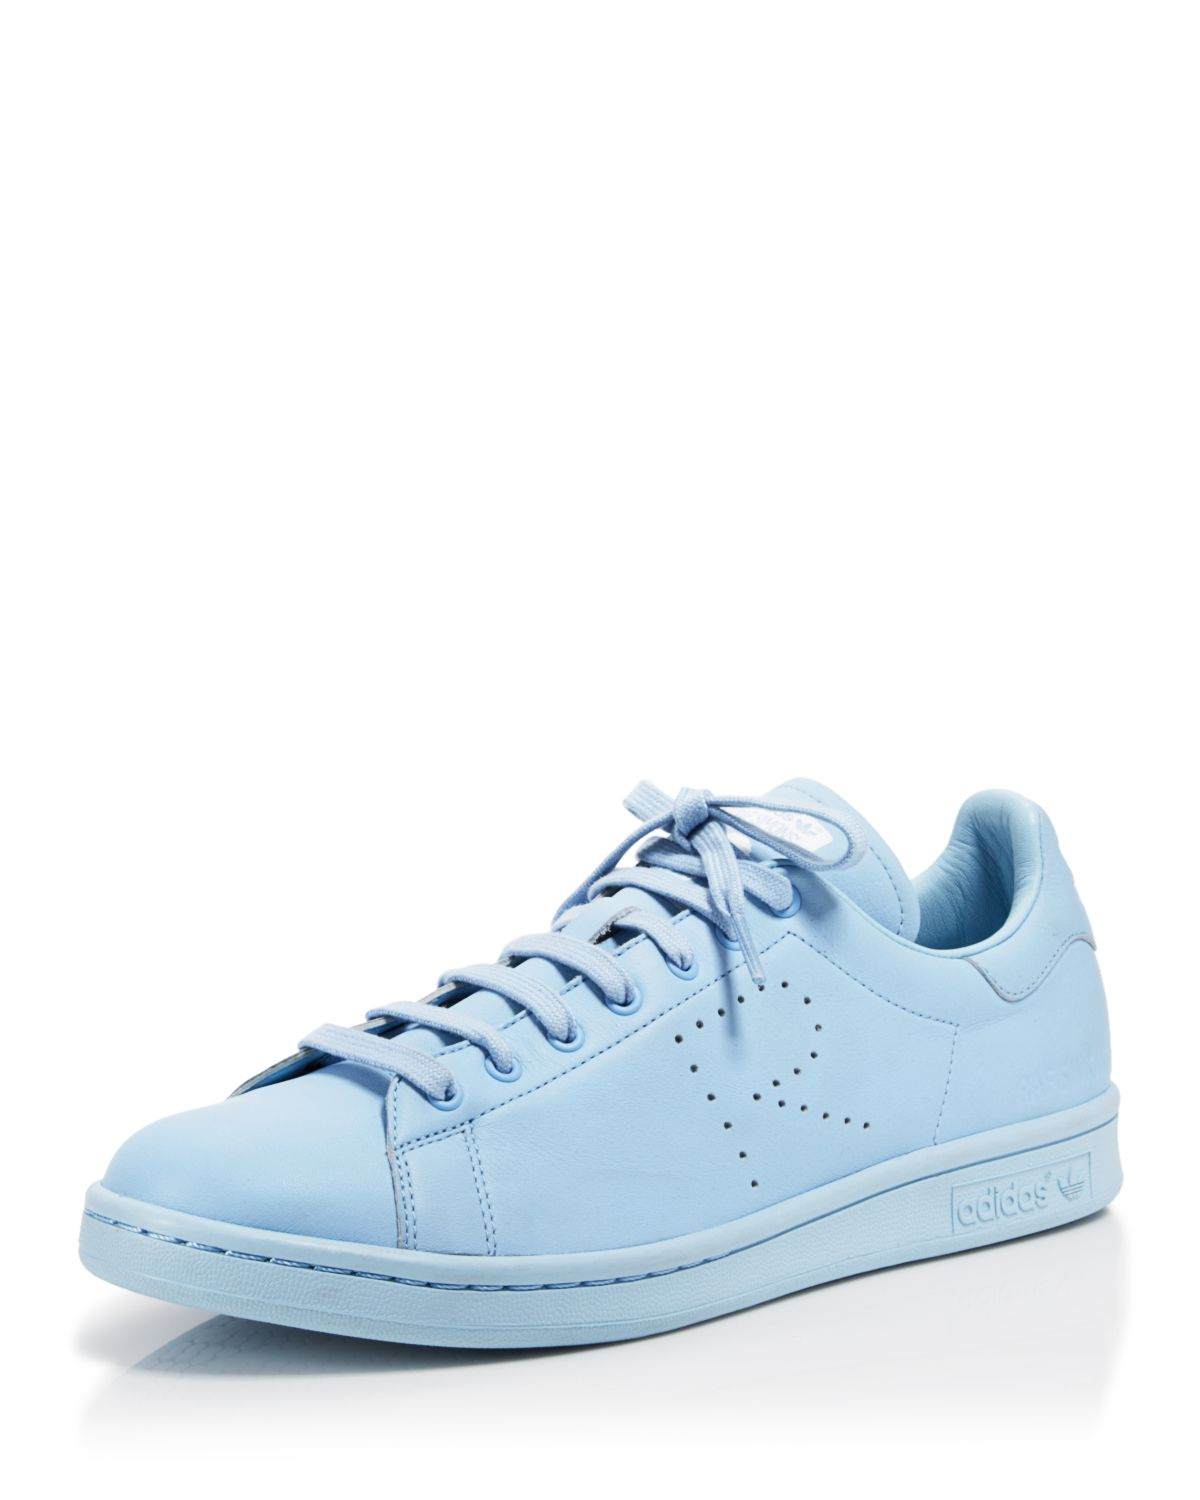 adidas By Raf Simons Stan Smith Leather Sneakers in Light Blue (Blue) - Lyst